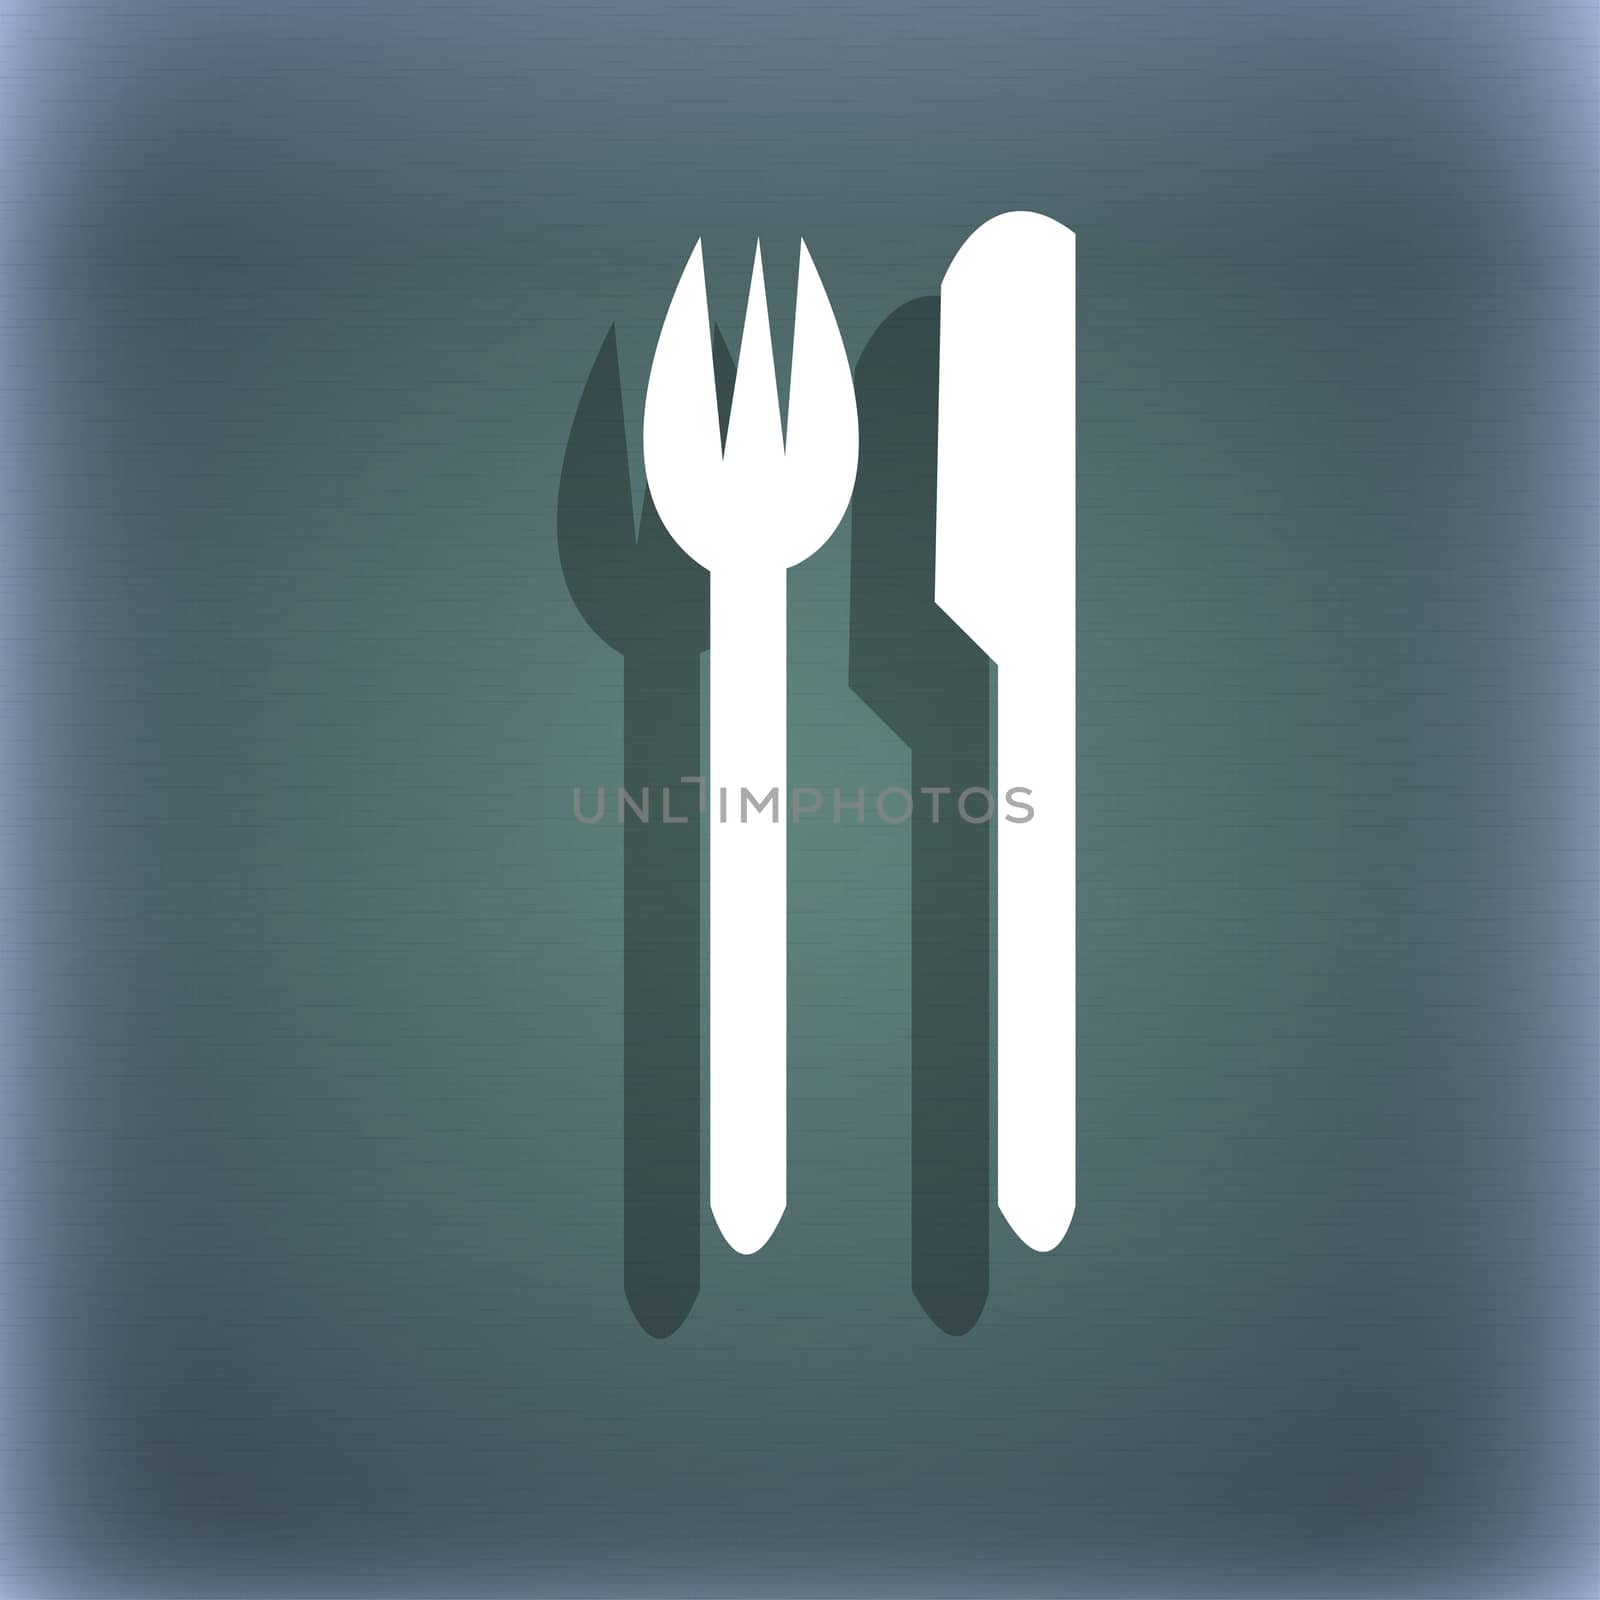 Eat sign icon. Cutlery symbol. Fork and knife. On the blue-green abstract background with shadow and space for your text. illustration